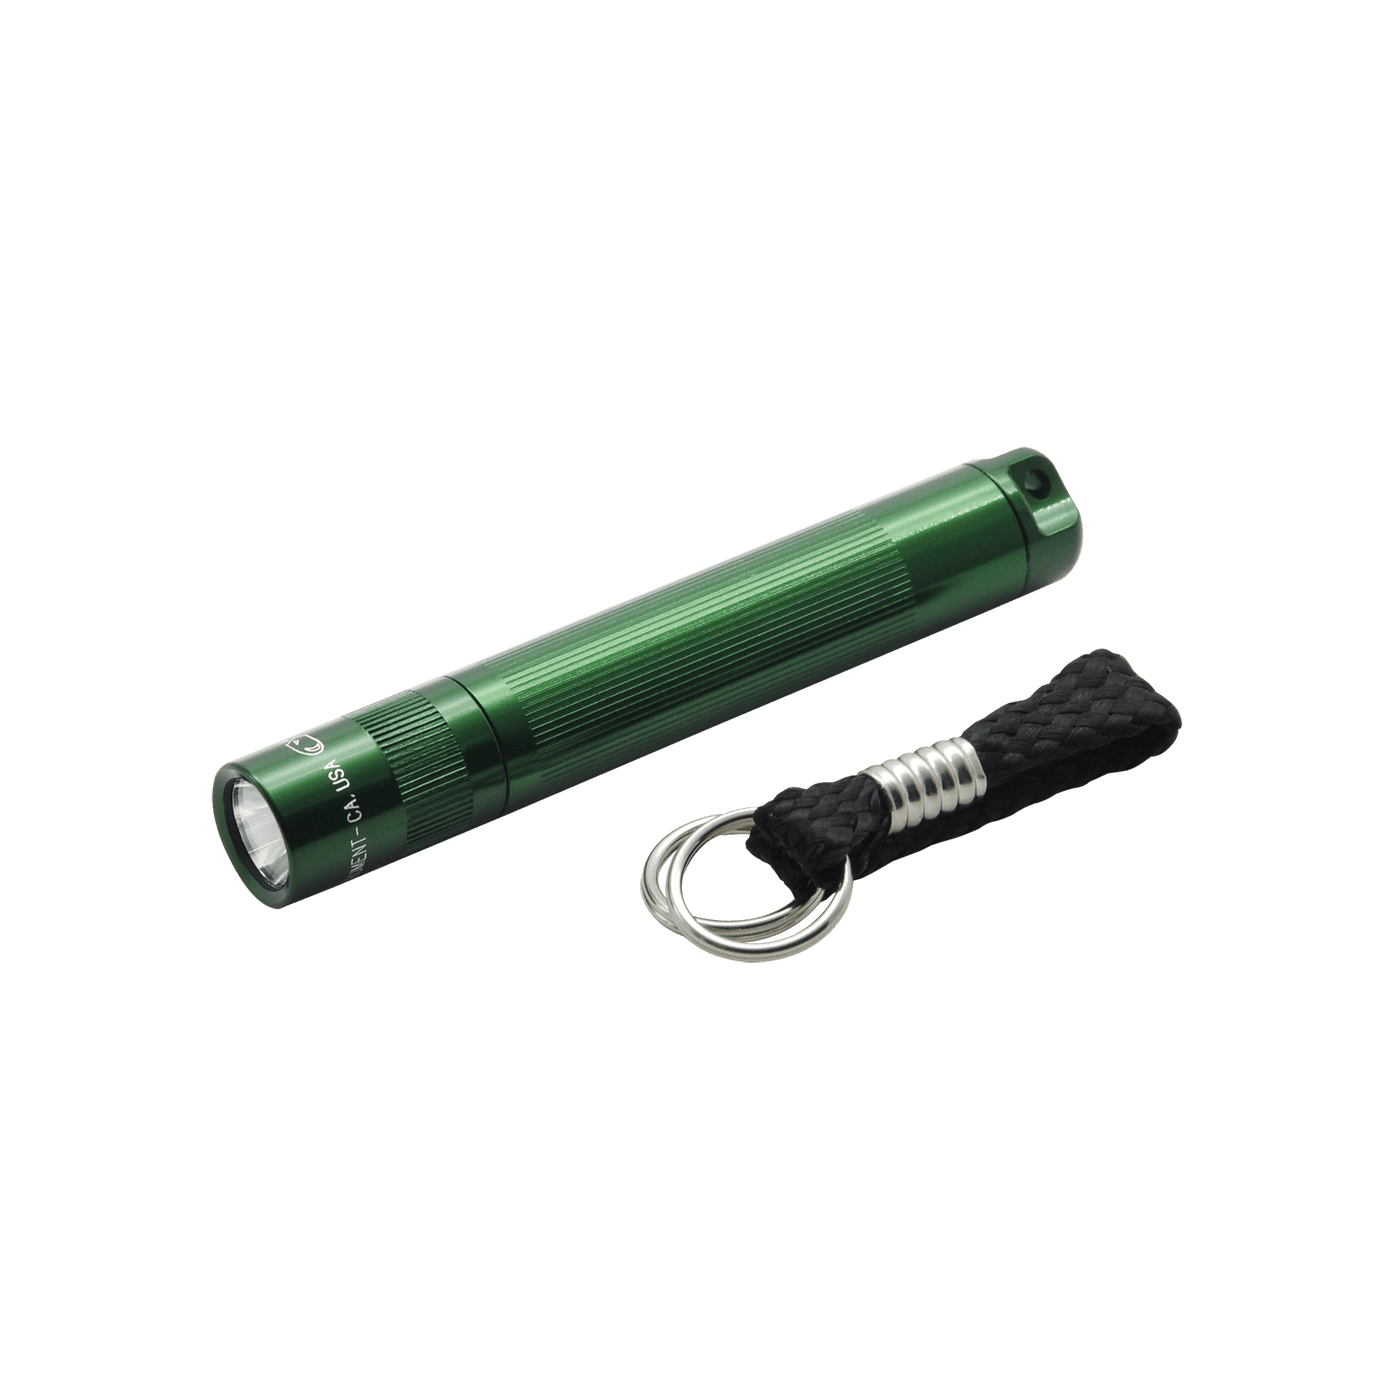 Maglite Solitaire LED Green Keychain Flashlight